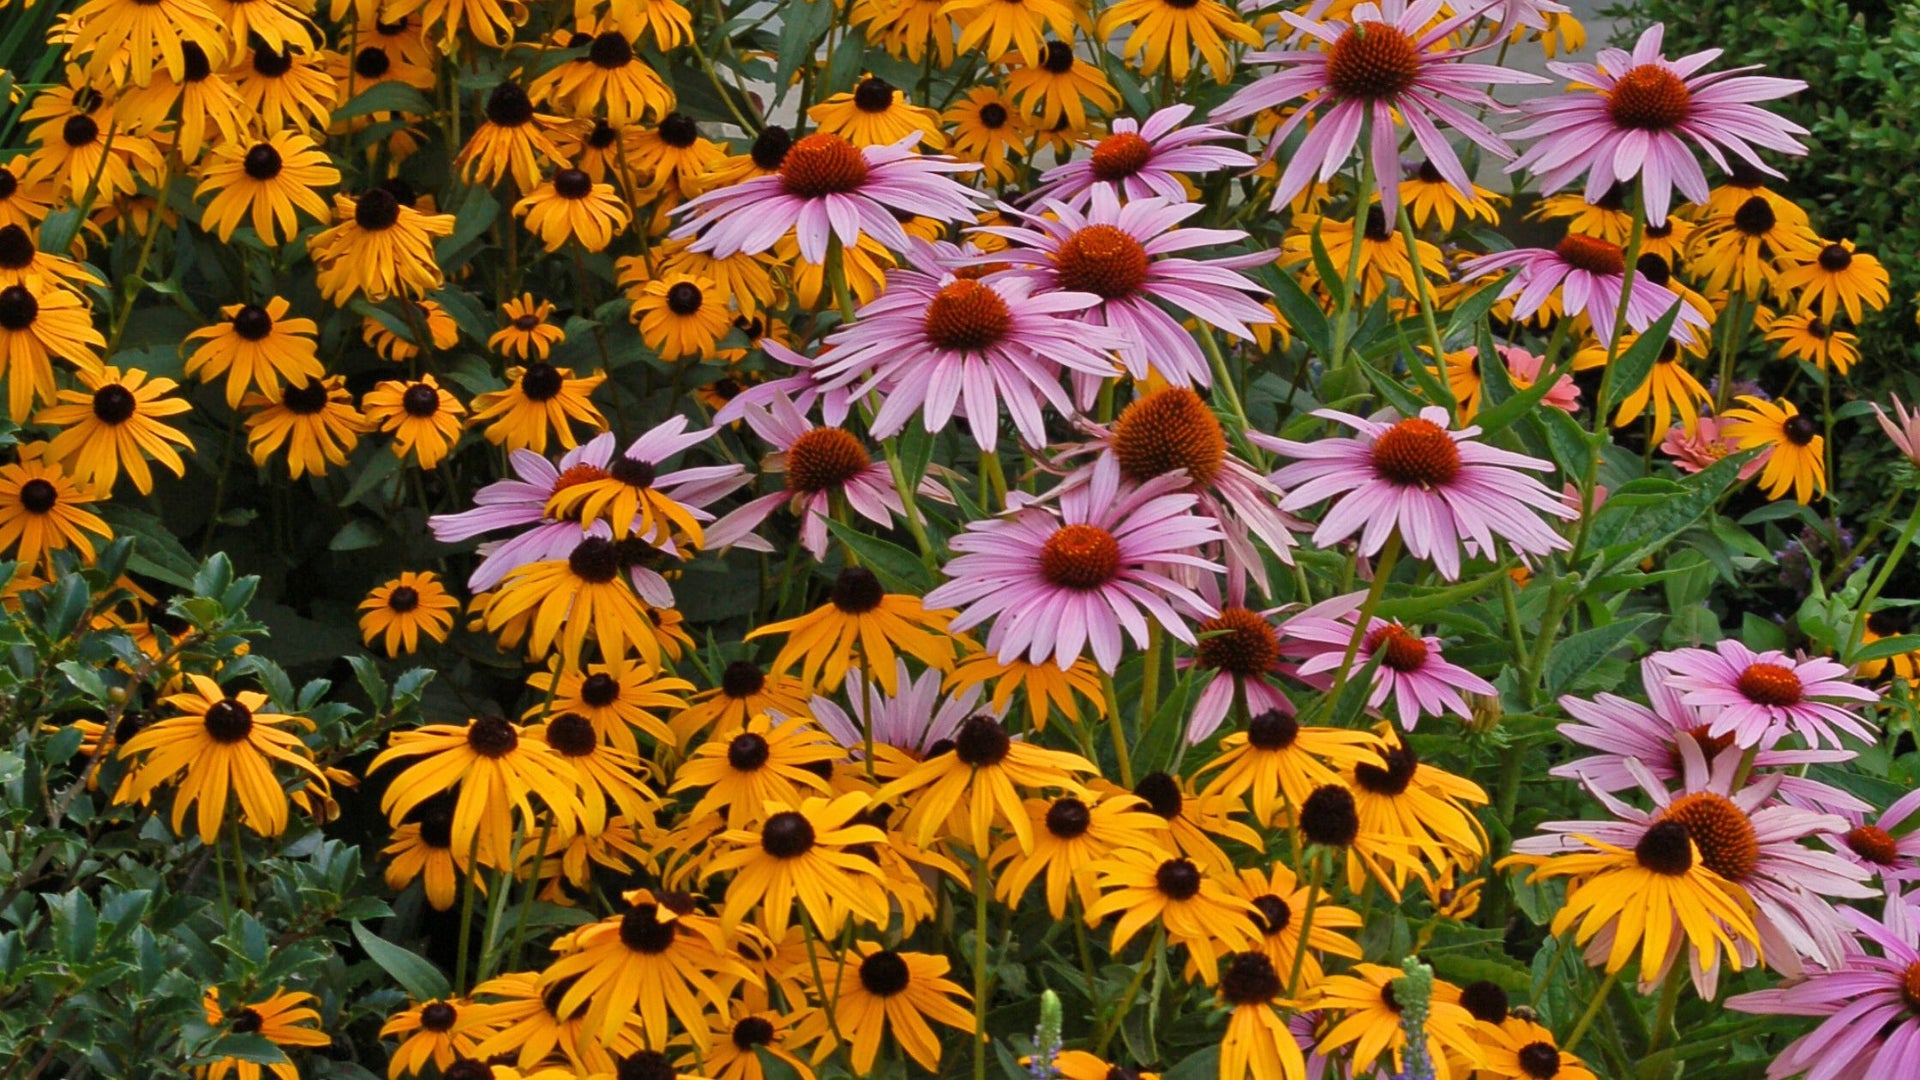 Best selling colorful perennials